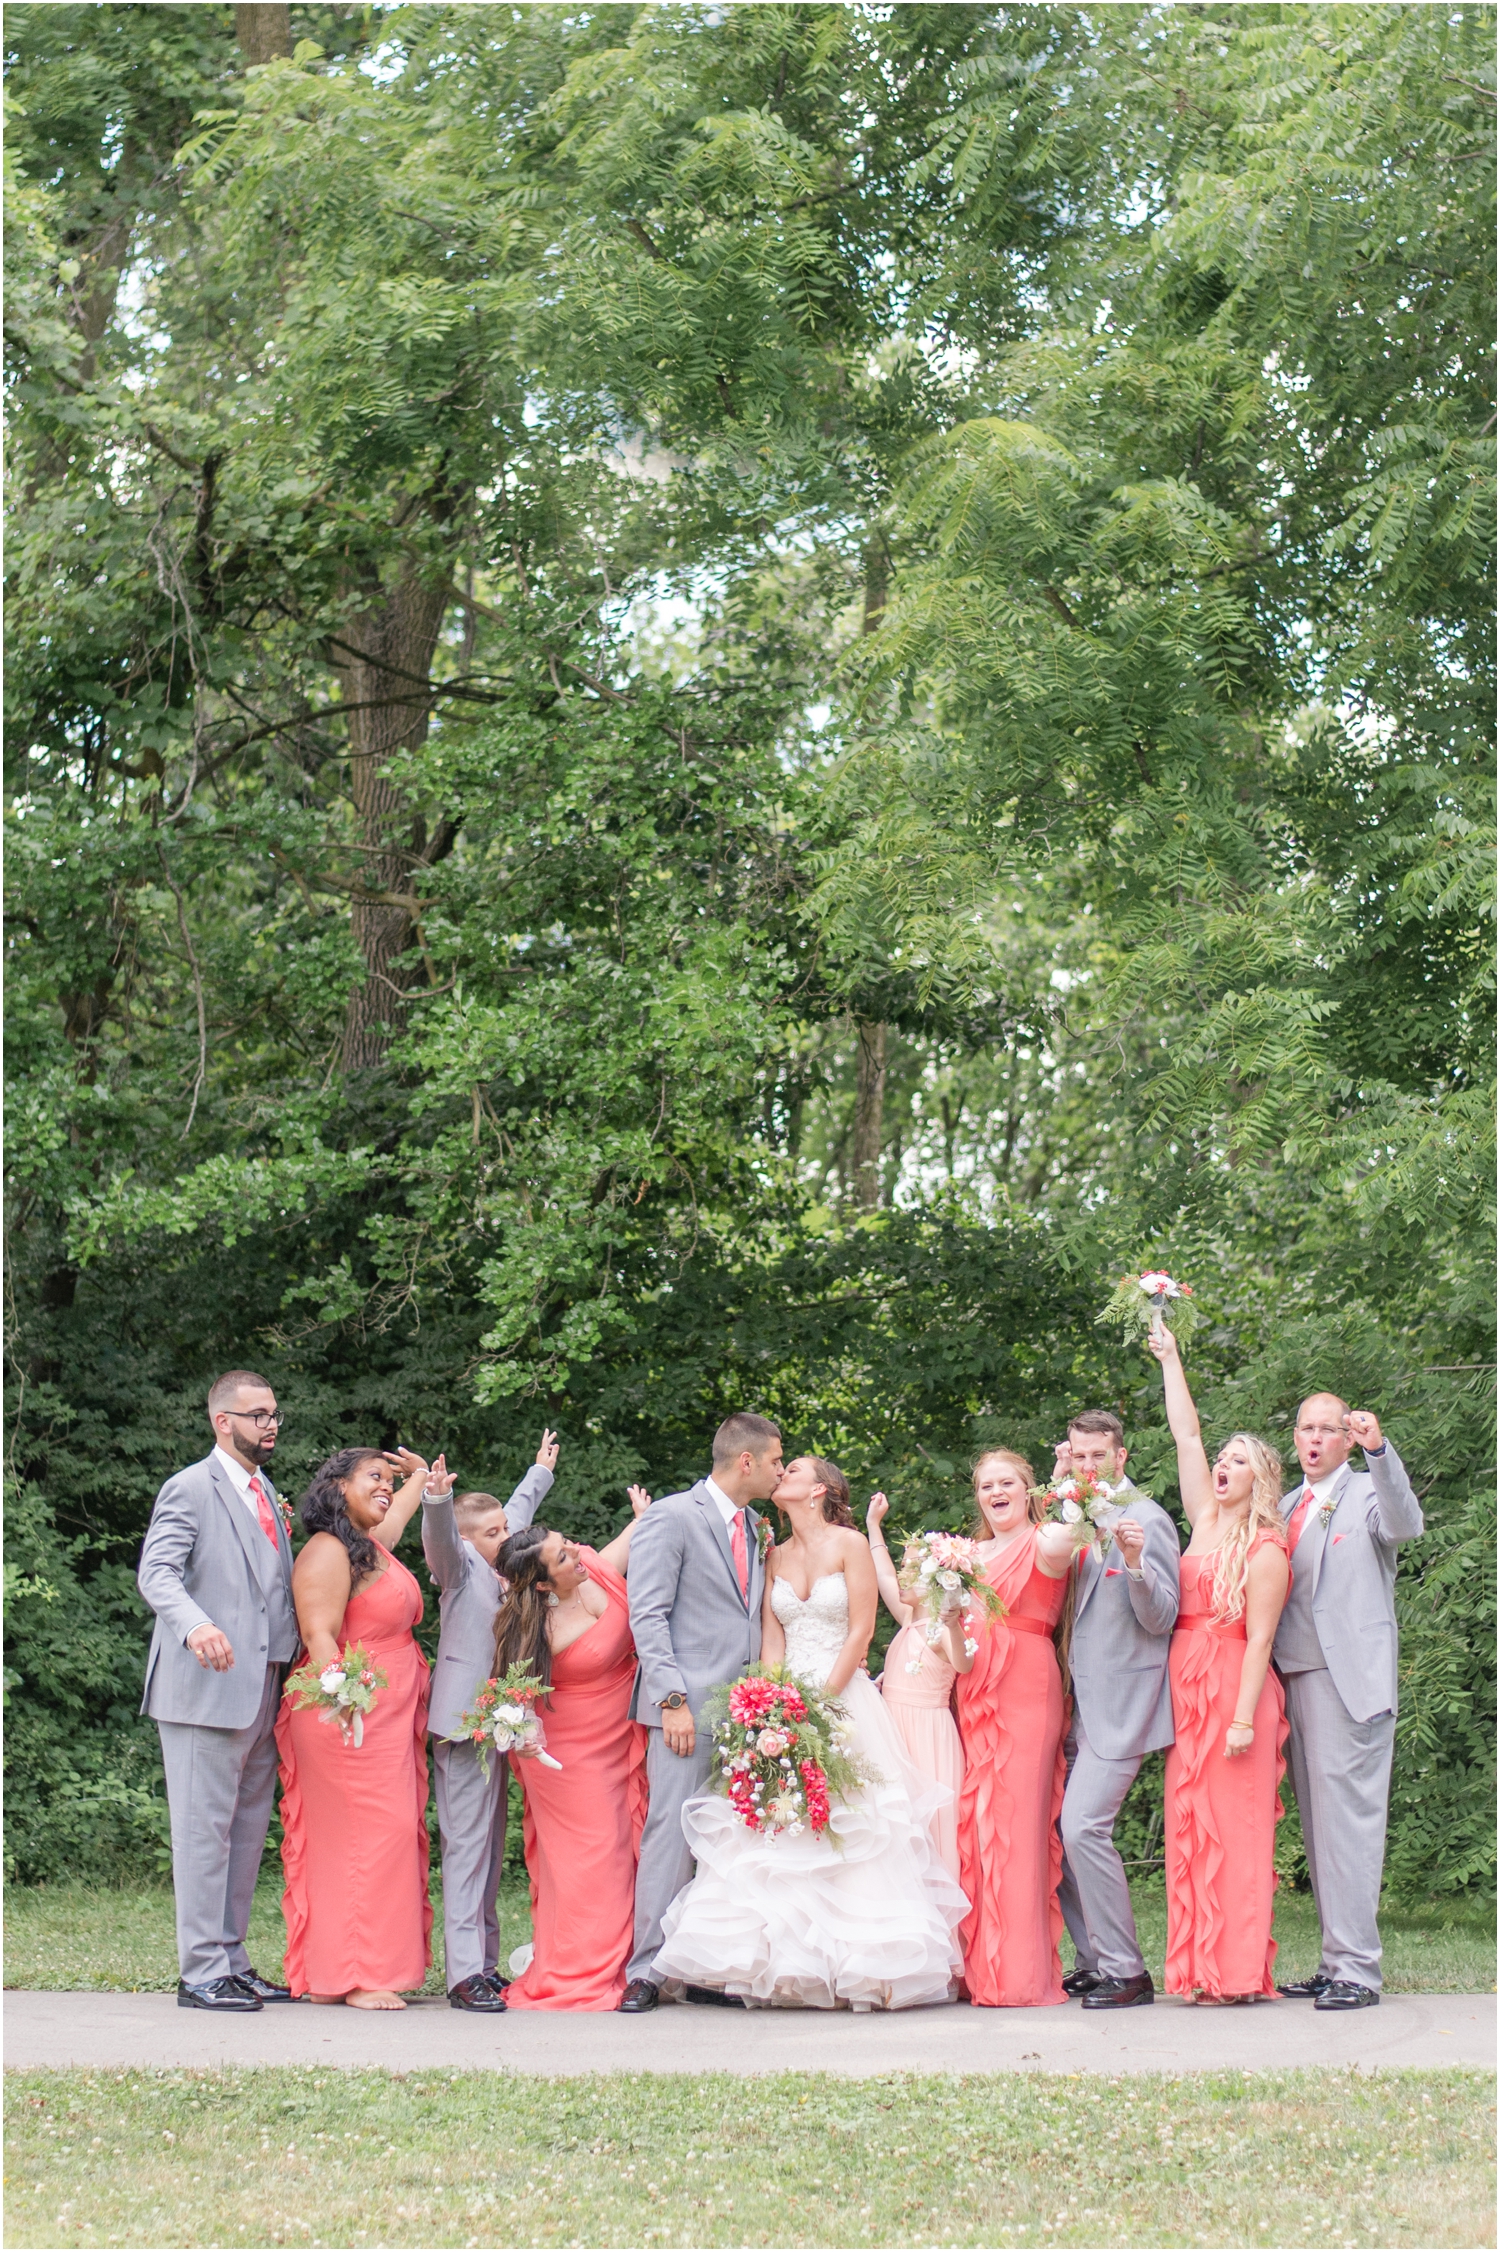 Bridal Party Portraits Blush Wedding Gown Wedding Photography Grey and Coral Pink Wedding Intimate Foster Park Indiana Wedding Photographer Rose Courts Photography